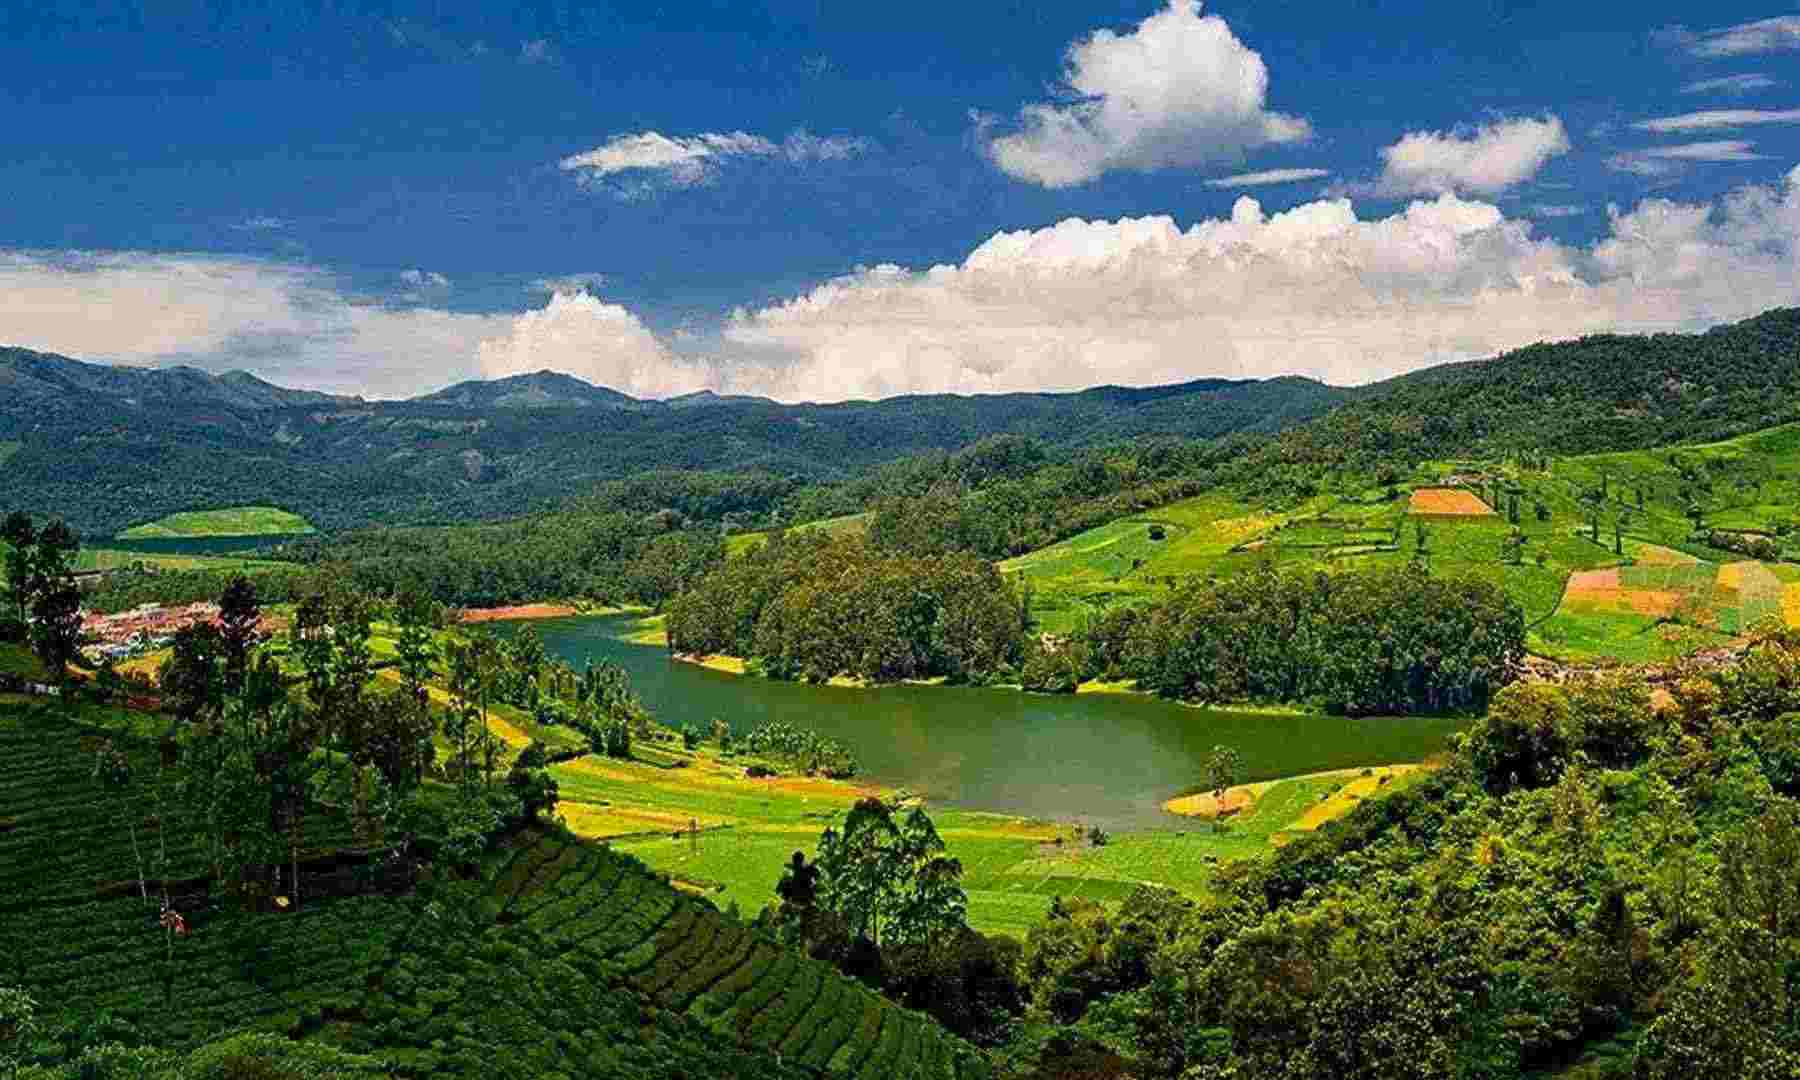 mysore ooty package tour from bangalore 2 days kstdc